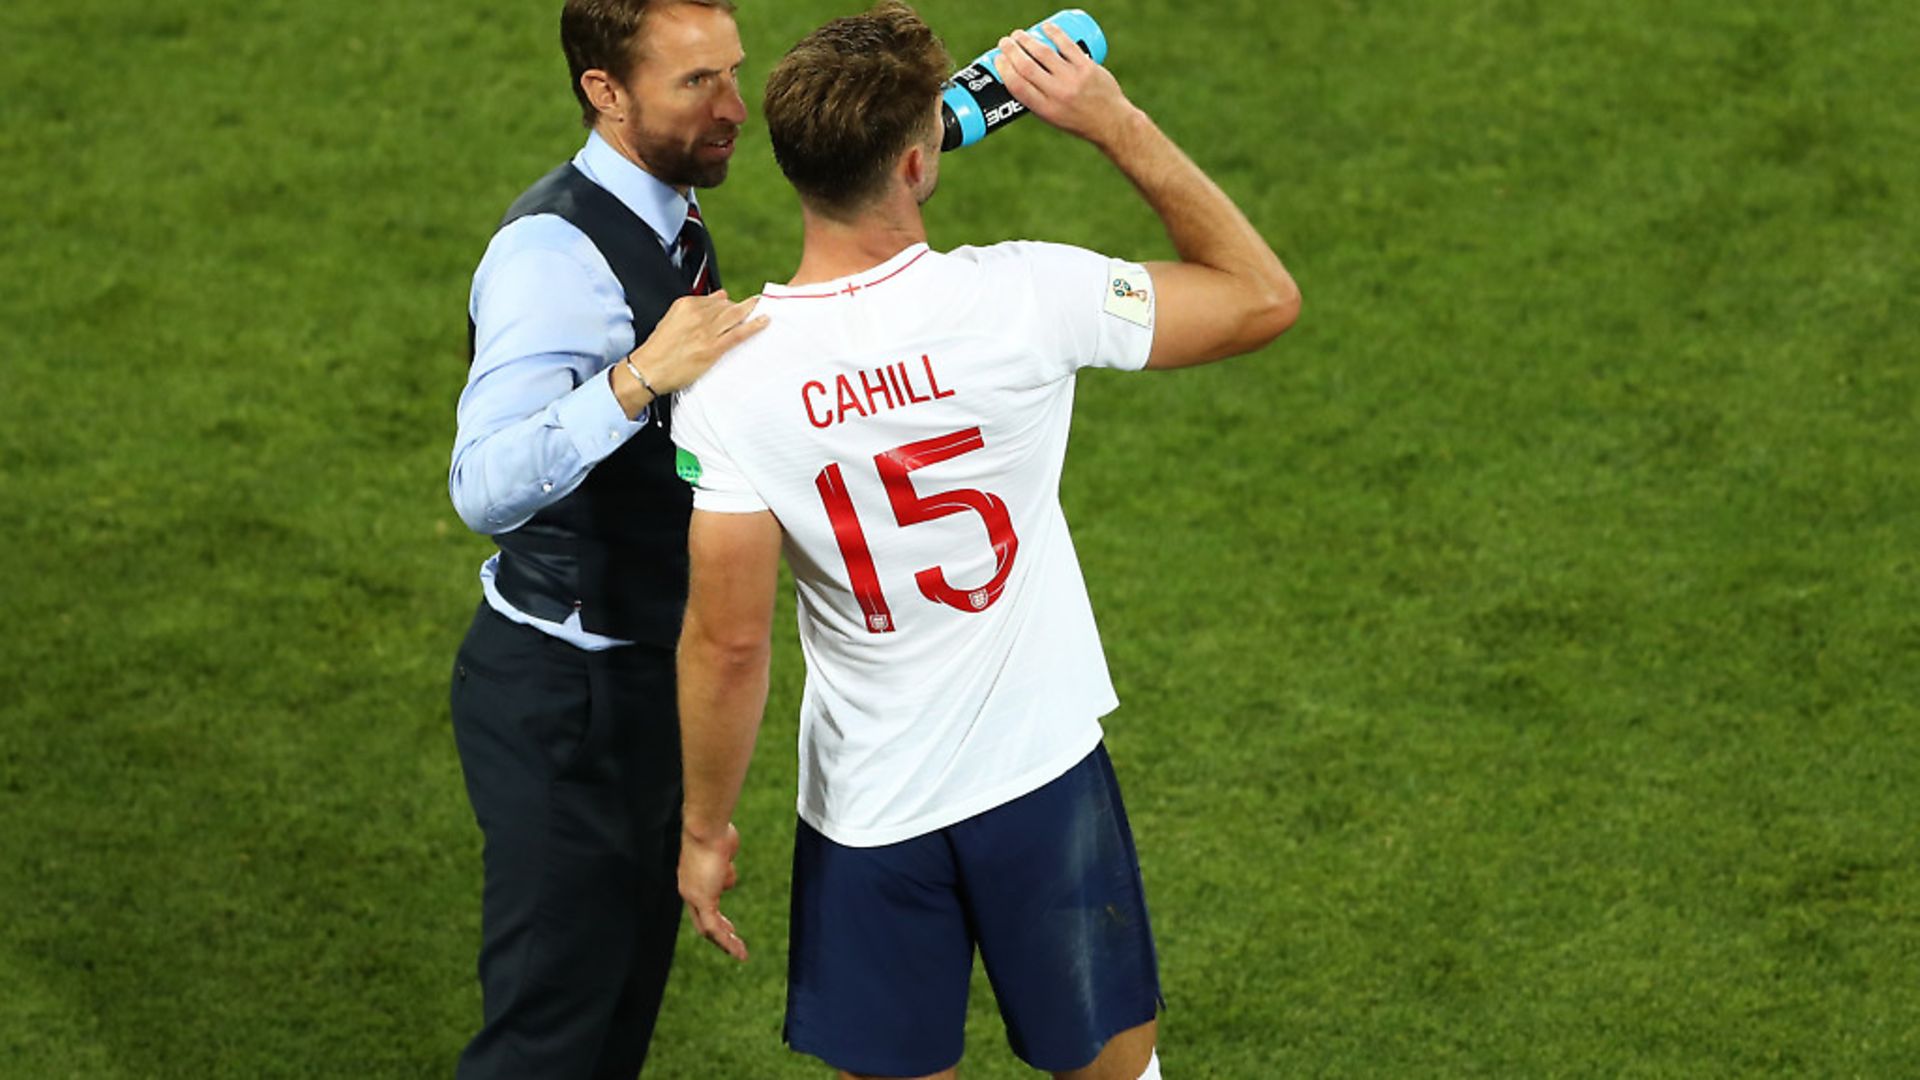 Gareth Southgate at the World Cup in Russia. Photograph: PA Images. - Credit: PA Wire/PA Images